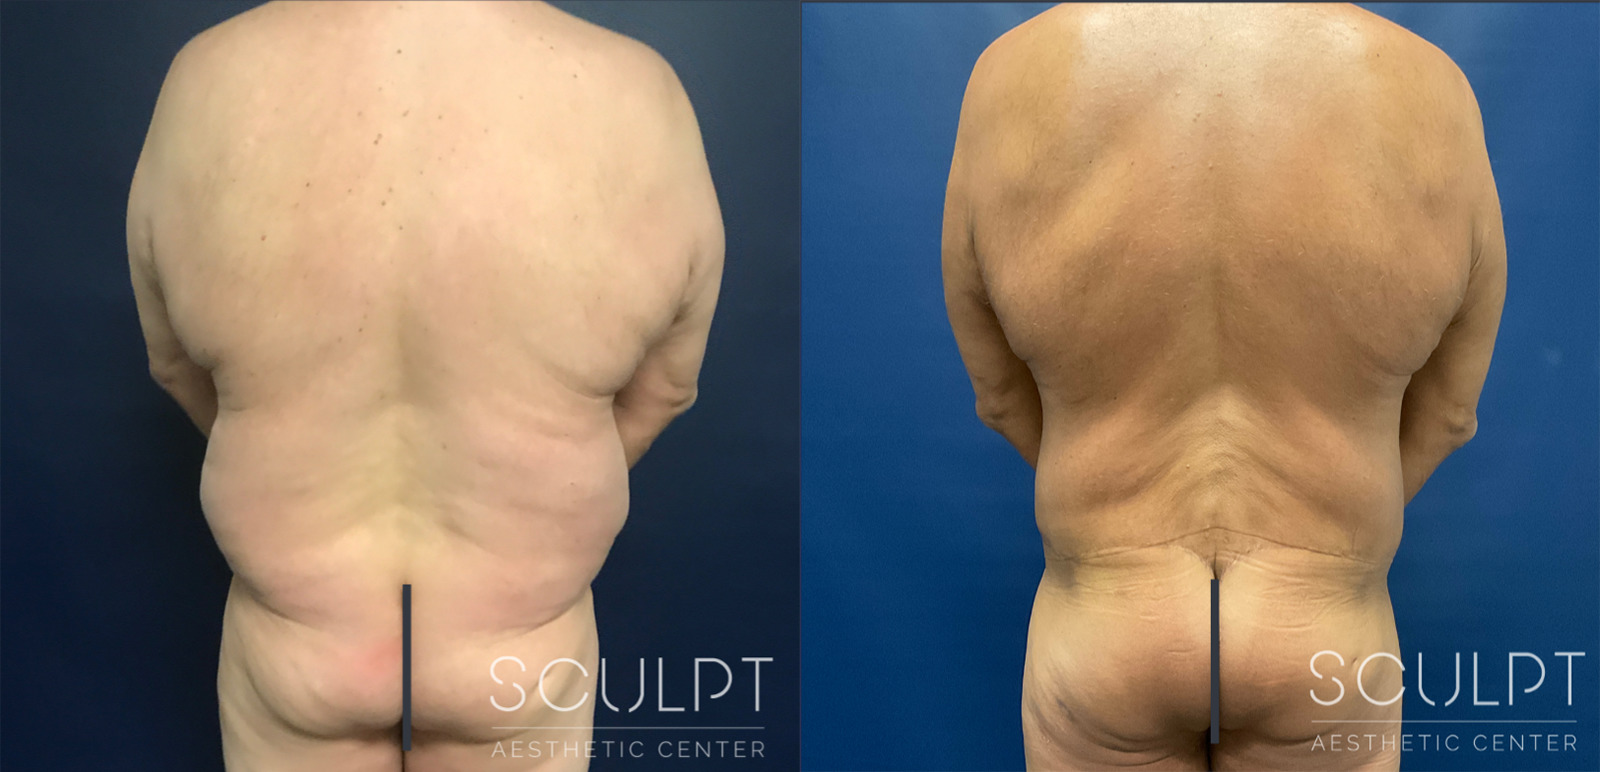 Male Skin Removal After Weight Loss Before and After Photo by Sculpt Aesthetic Center in Frisco, TX